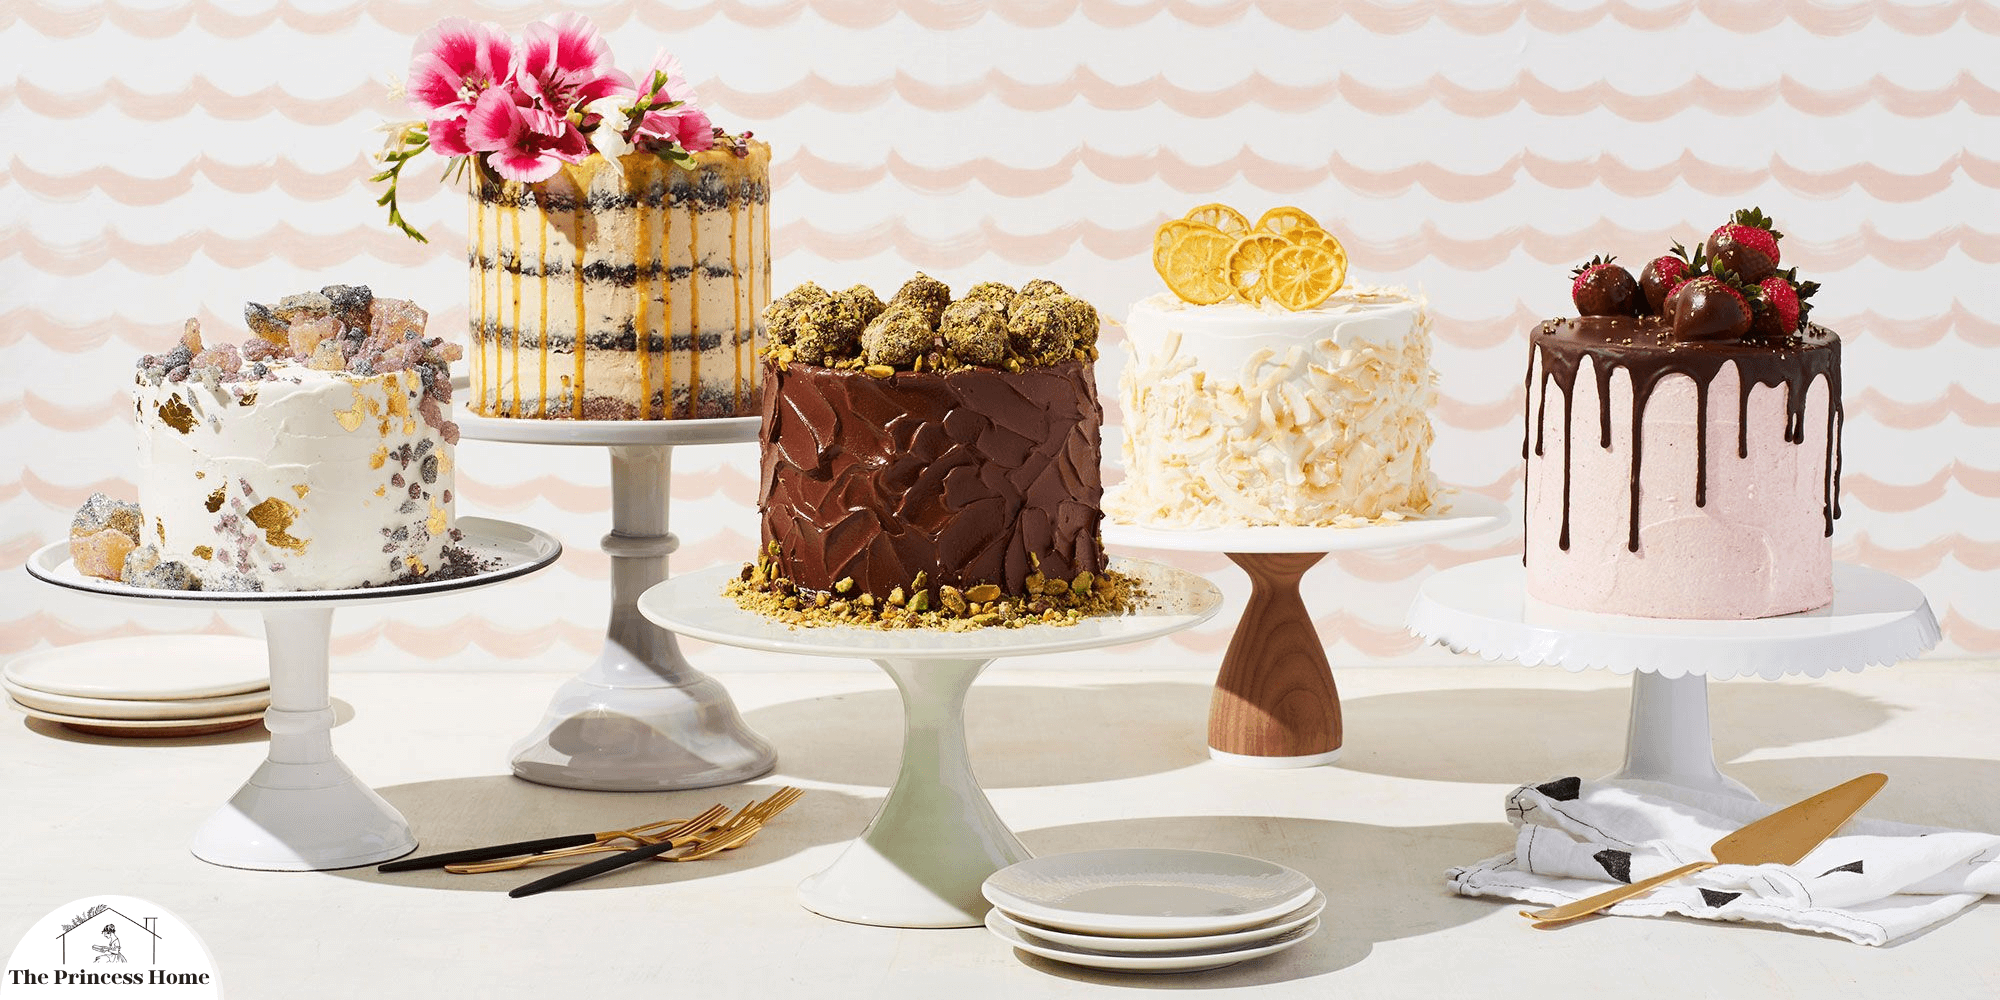 8.Decorative Cake Stands and Platters: